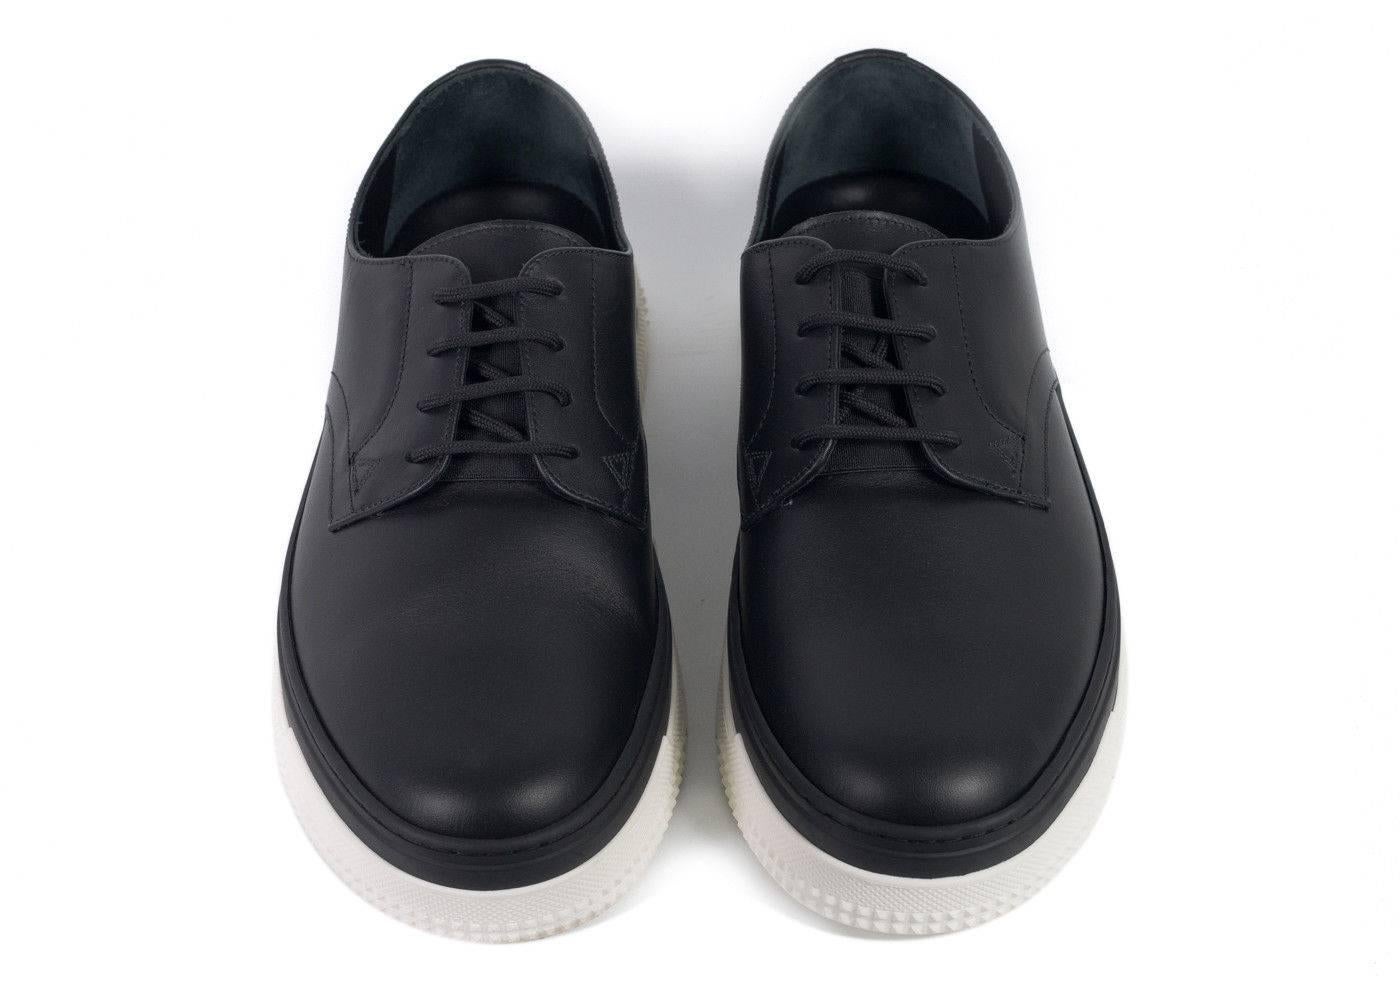 Brand New Valentino Sneakers
Original Box & Dust Bag Included
Retails in Stores & Online for $895
Size IT43.5 / US10.5 Fits True to Size

These black and white Valentino leather shoes are an elegant pair from the luxury label's feted Spring/Summer